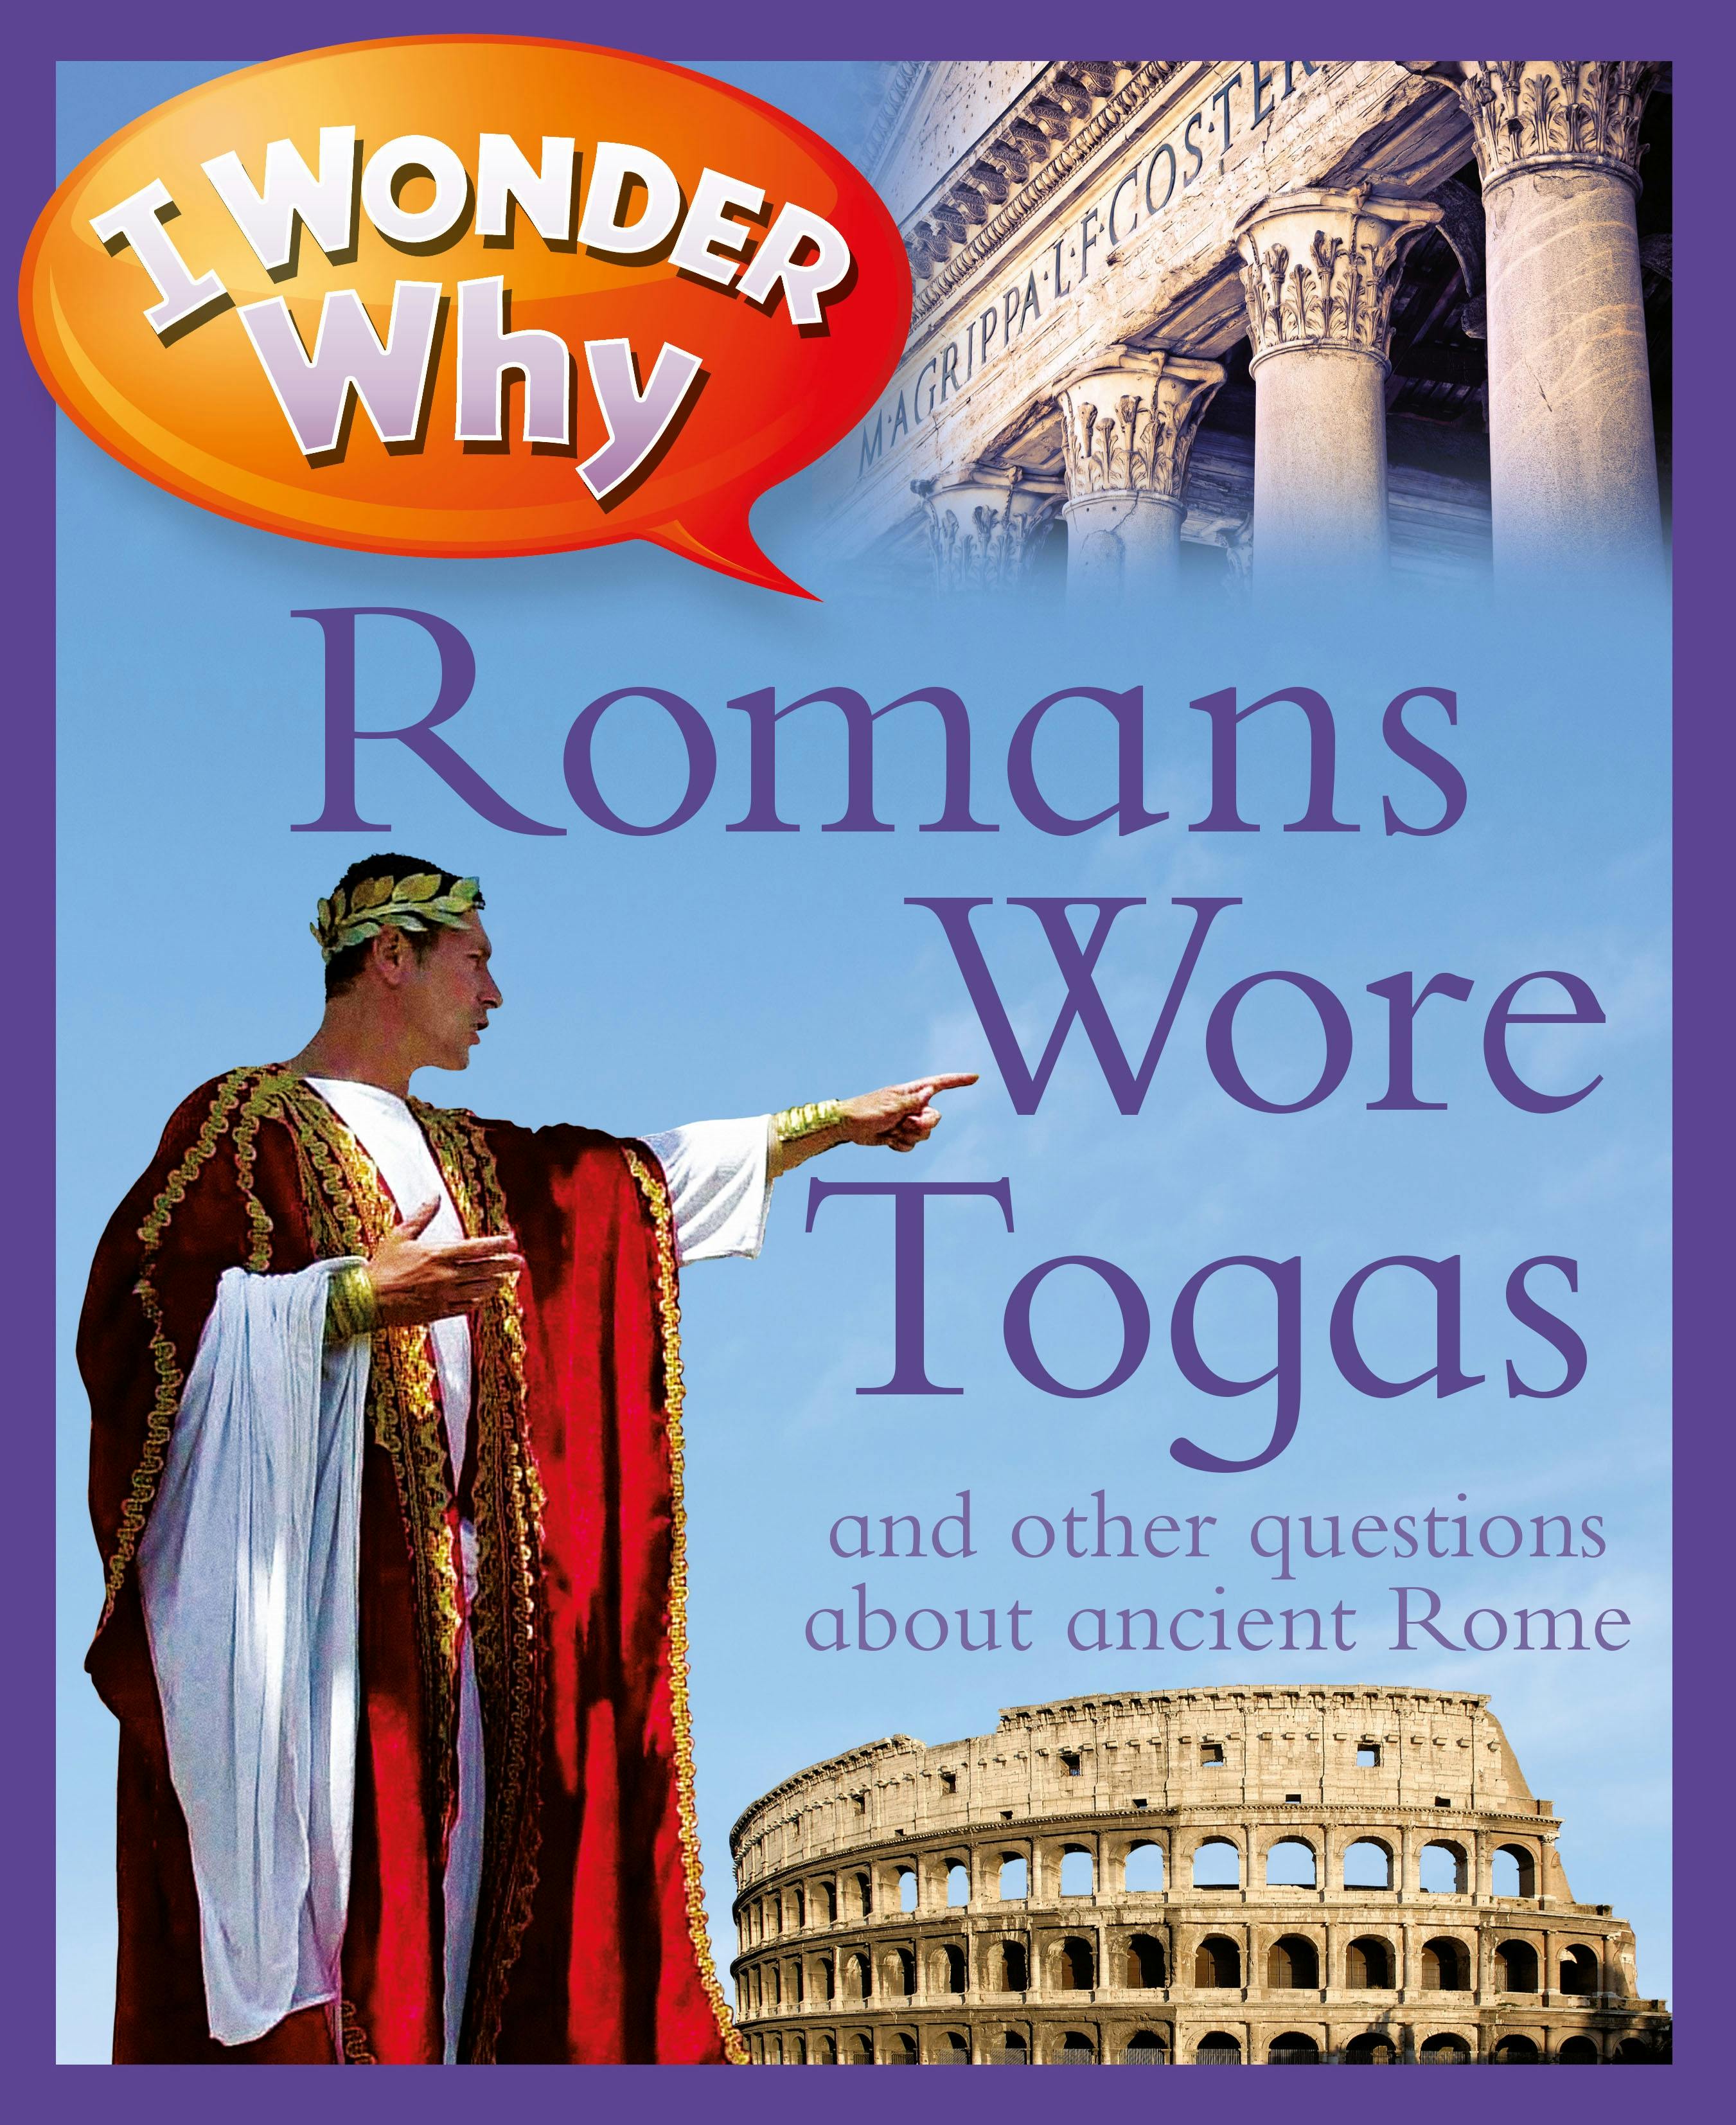 Image of I Wonder Why Romans Wore Togas